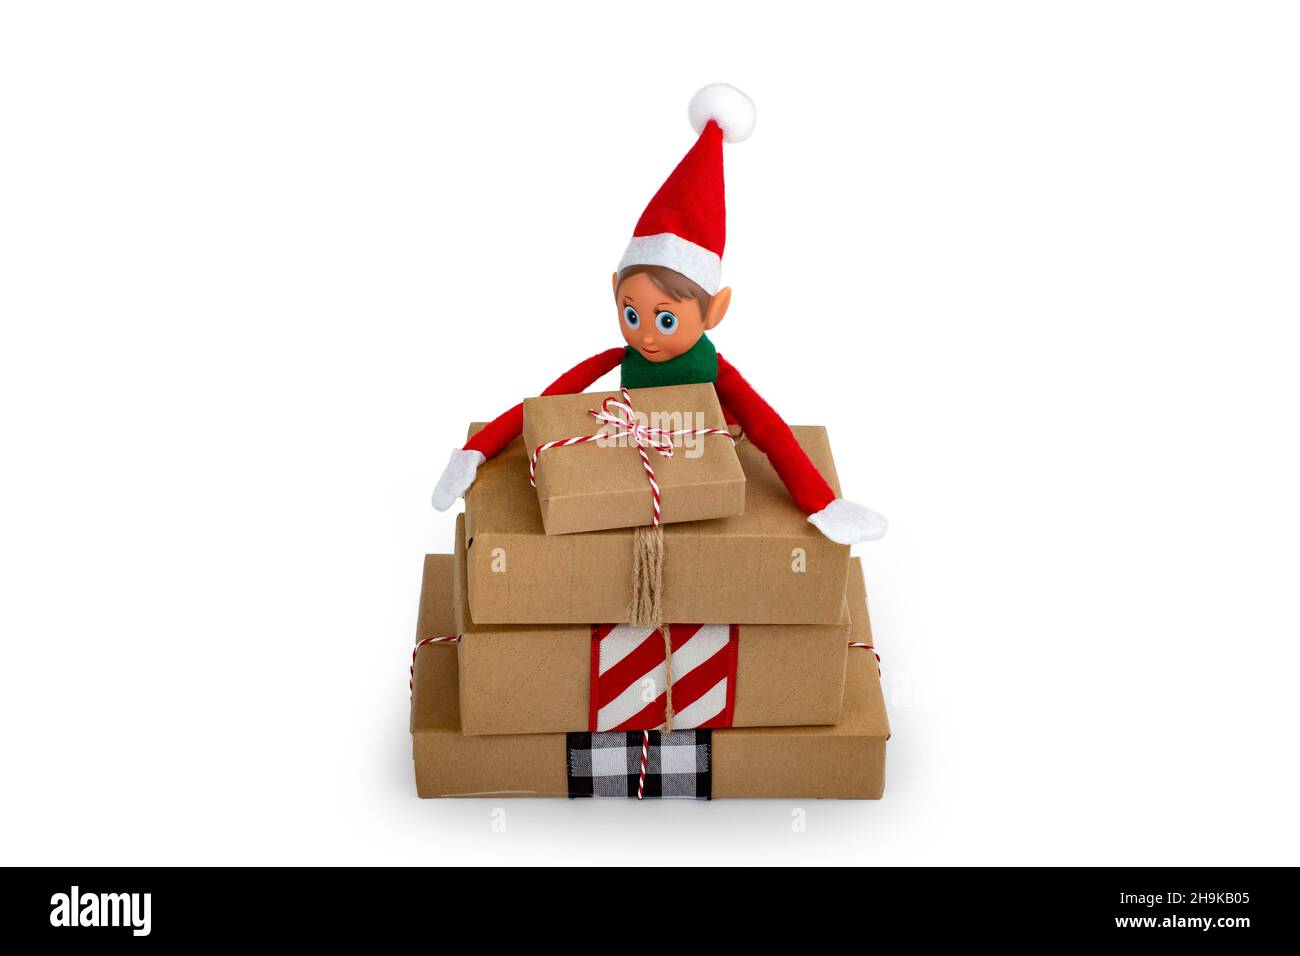 Christmas Elf  on a stack of gift boxes on an isolated  white background with copy space. Christmas spirit, Christmas family tradition. Stock Photo